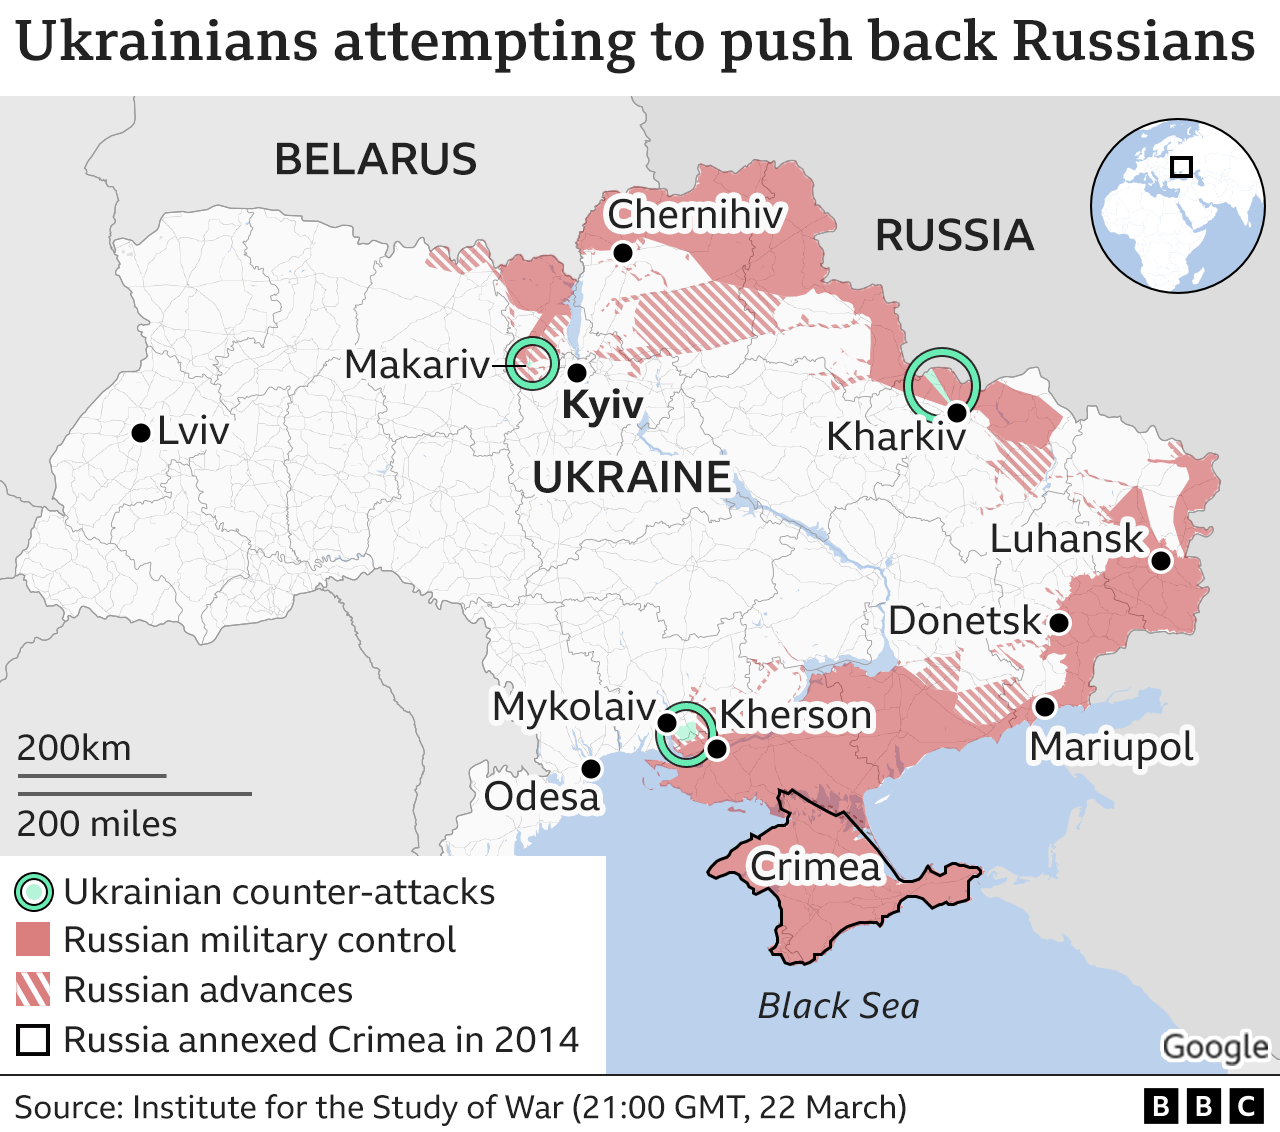 Map showing areas where Ukrainian forces have launched counter-attacks against Russian troops